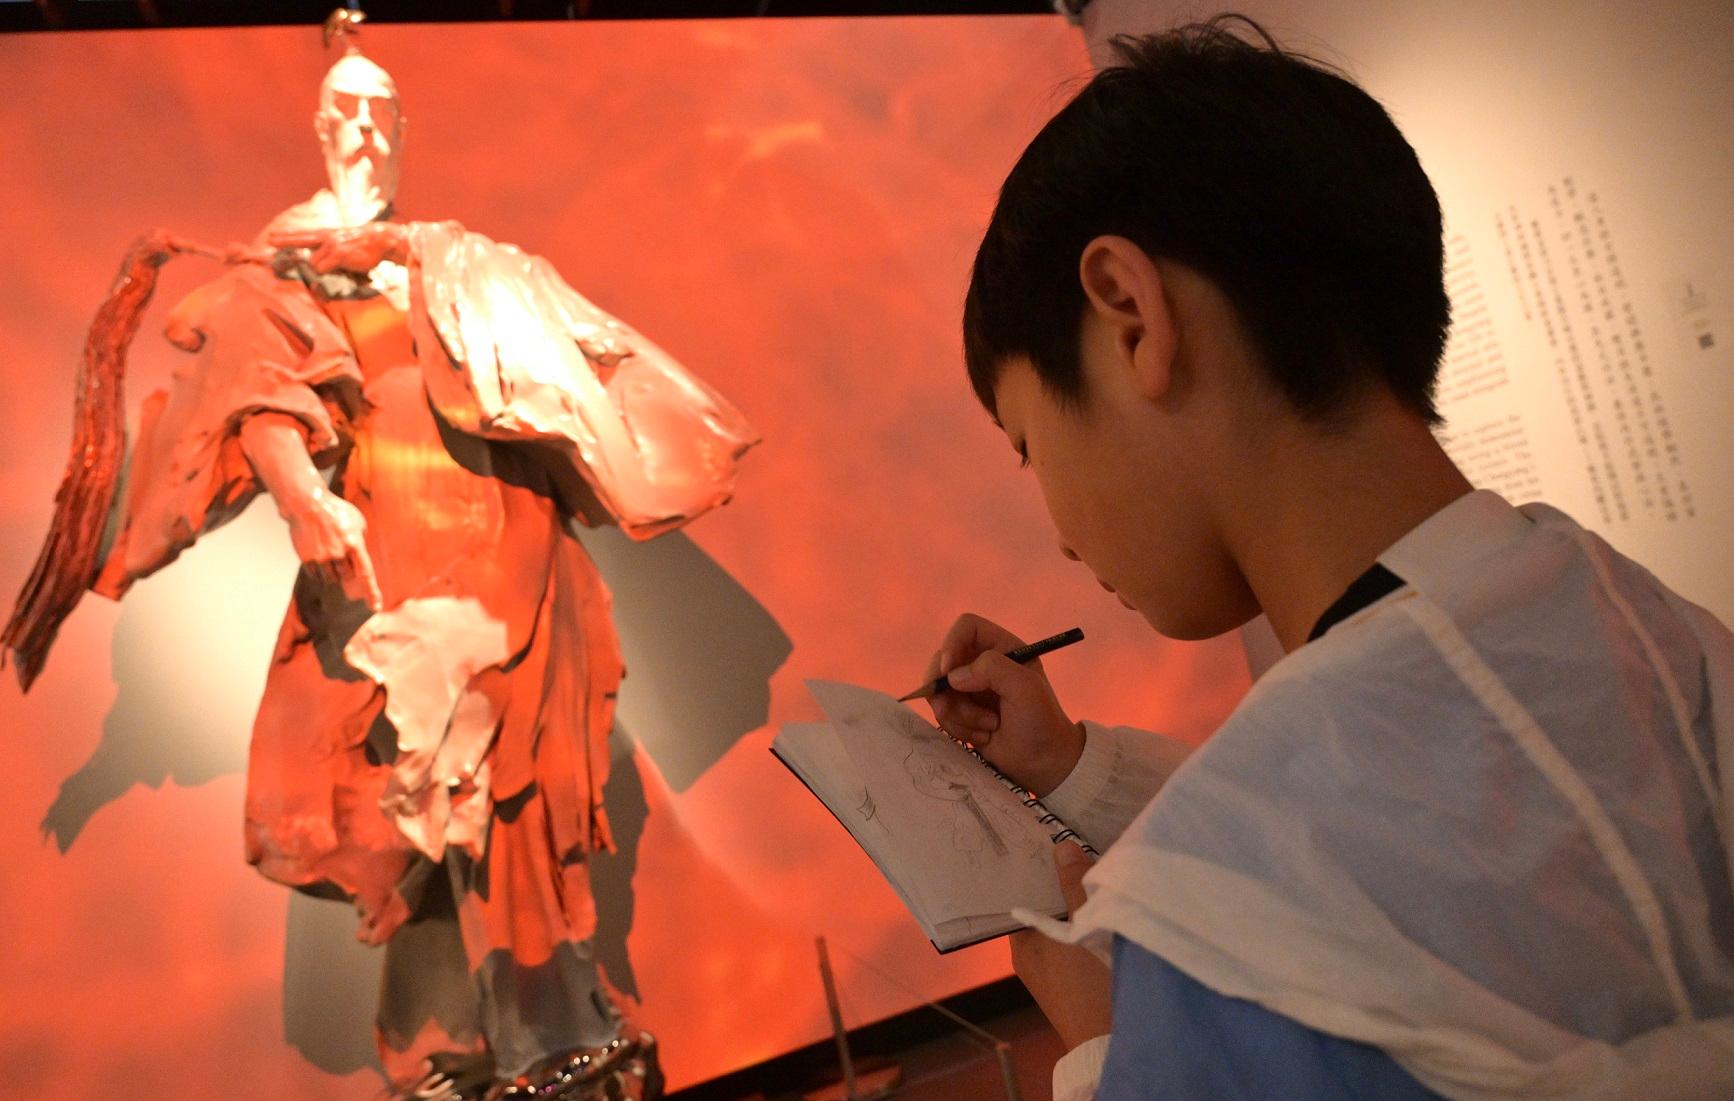 The "A Path to Glory - Jin Yong's Centennial Memorial, Sculpted by Ren Zhe" exhibition at the Hong Kong Heritage Museum has reached 100 000 visitors since its opening on March 16. Photo shows a visitor touring the exhibition.